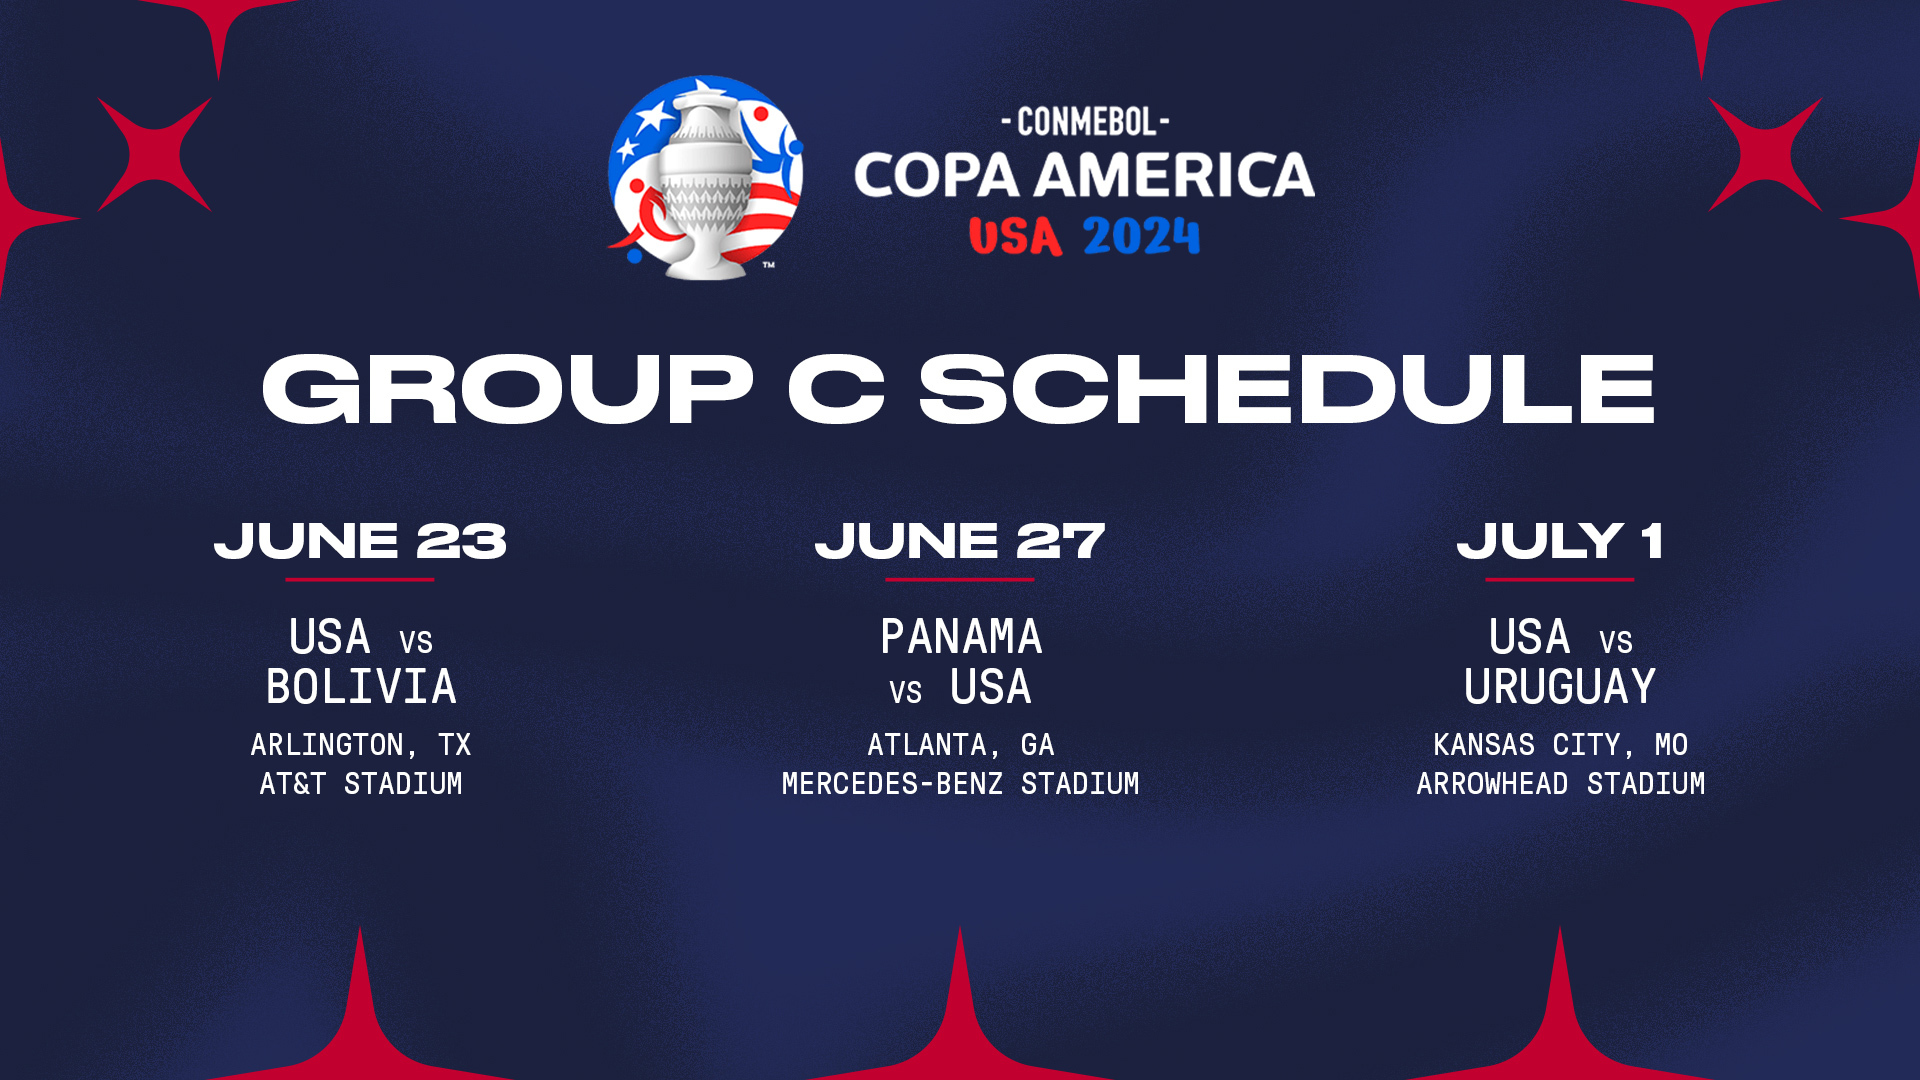 Defending champion Argentina opens Copa América against Canada or Trinidad.  US starts with Bolivia